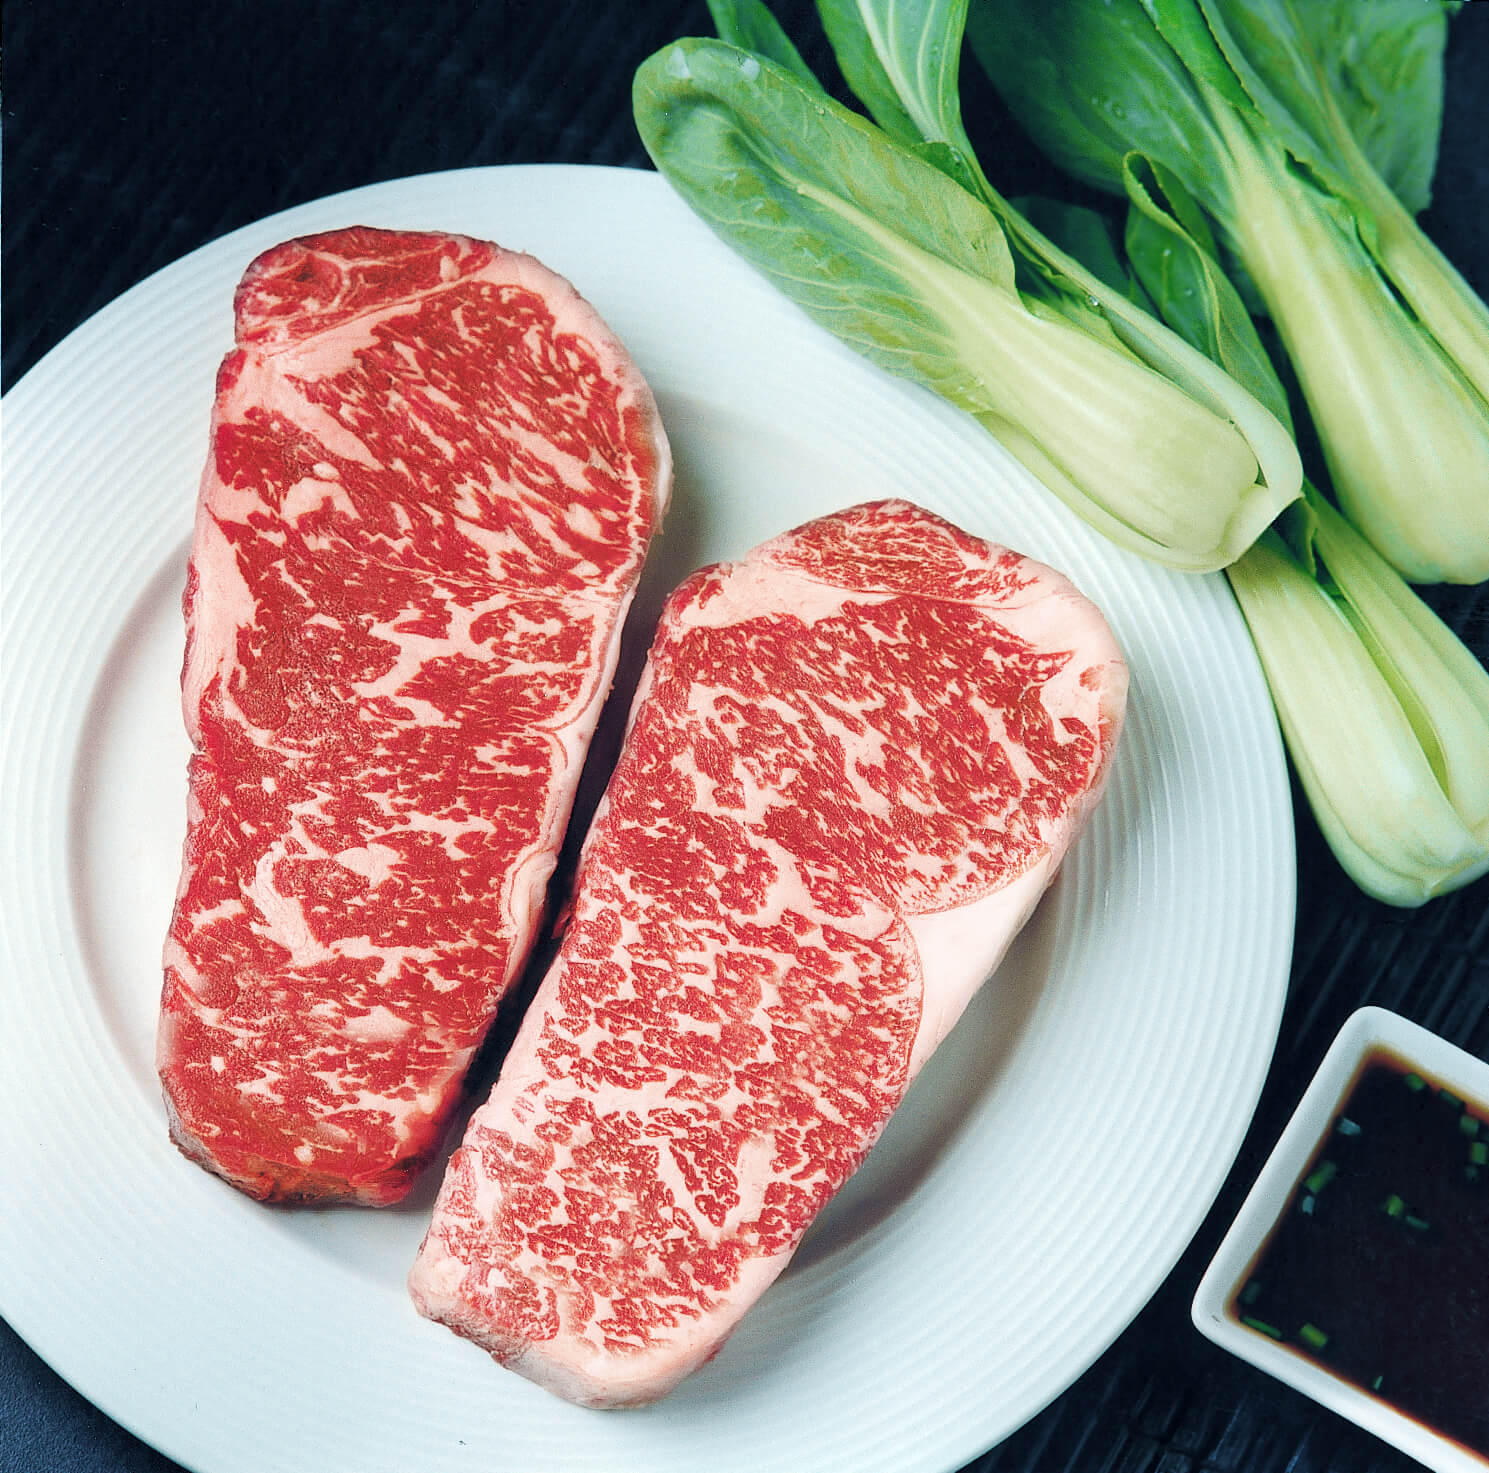 Wagyu vs Kobe Beef - What's the difference? : Steak University